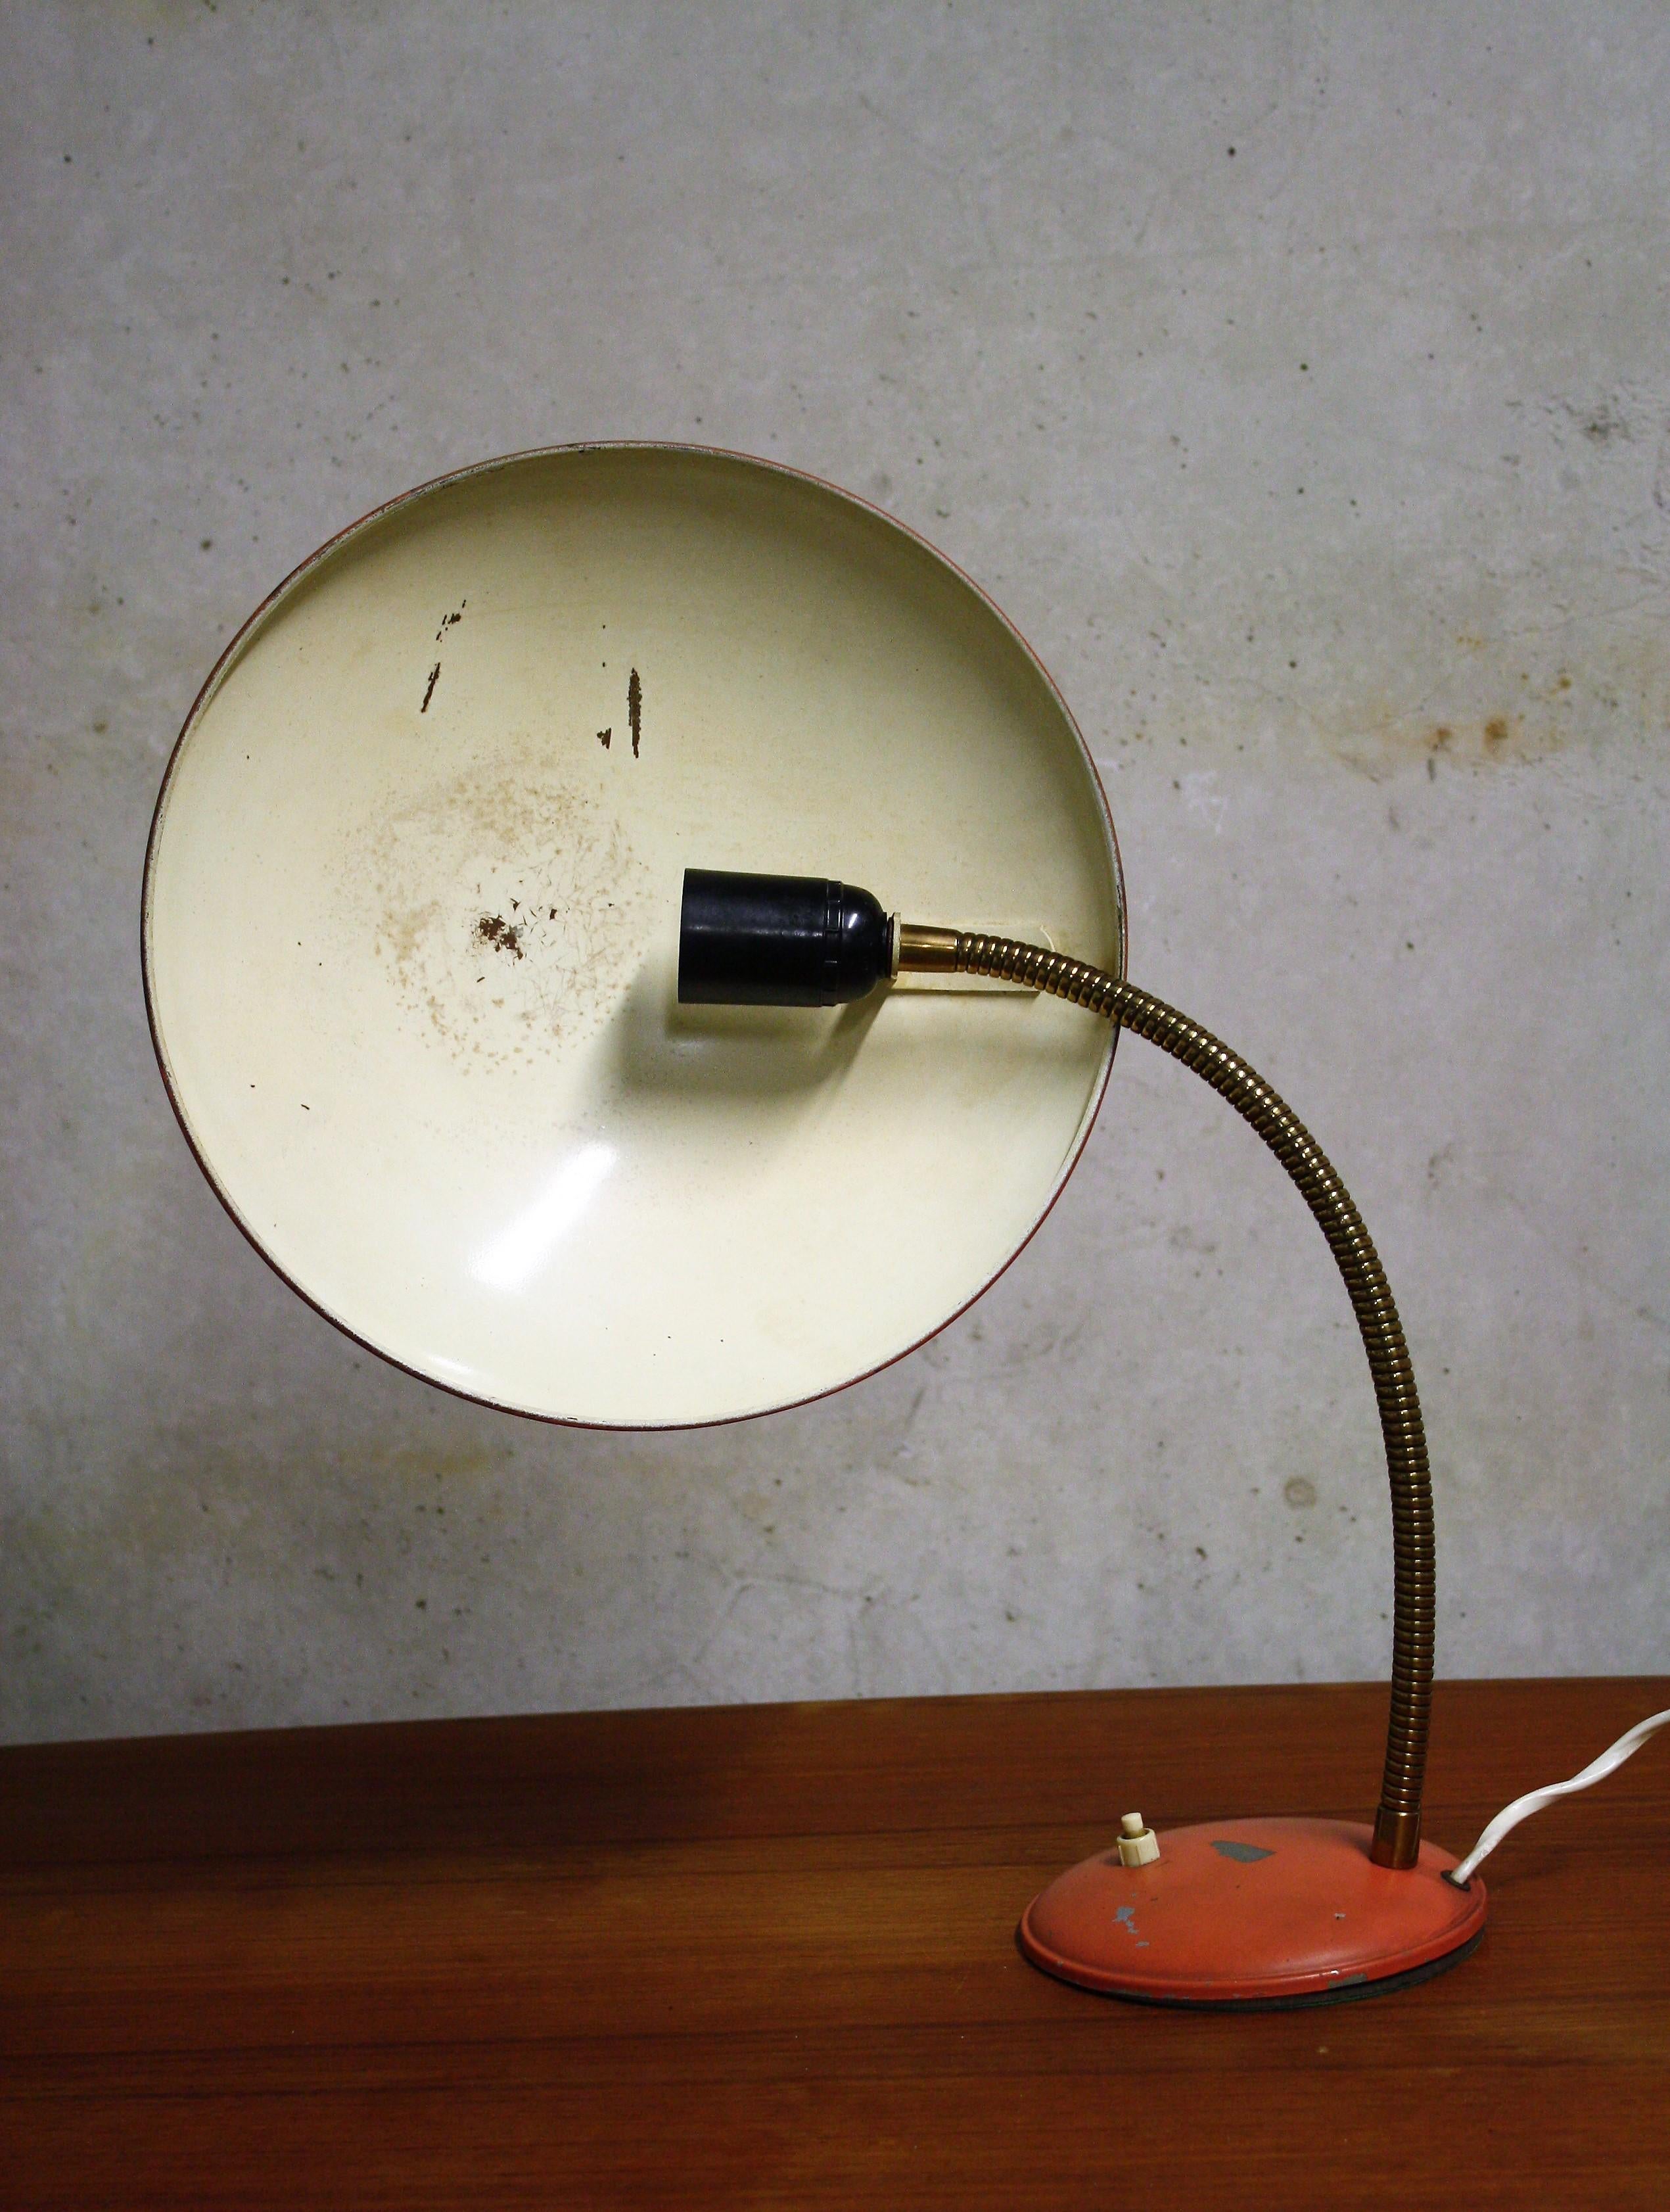 Orange Midcentury Table Lamp by Philips, 1960s (Space Age)